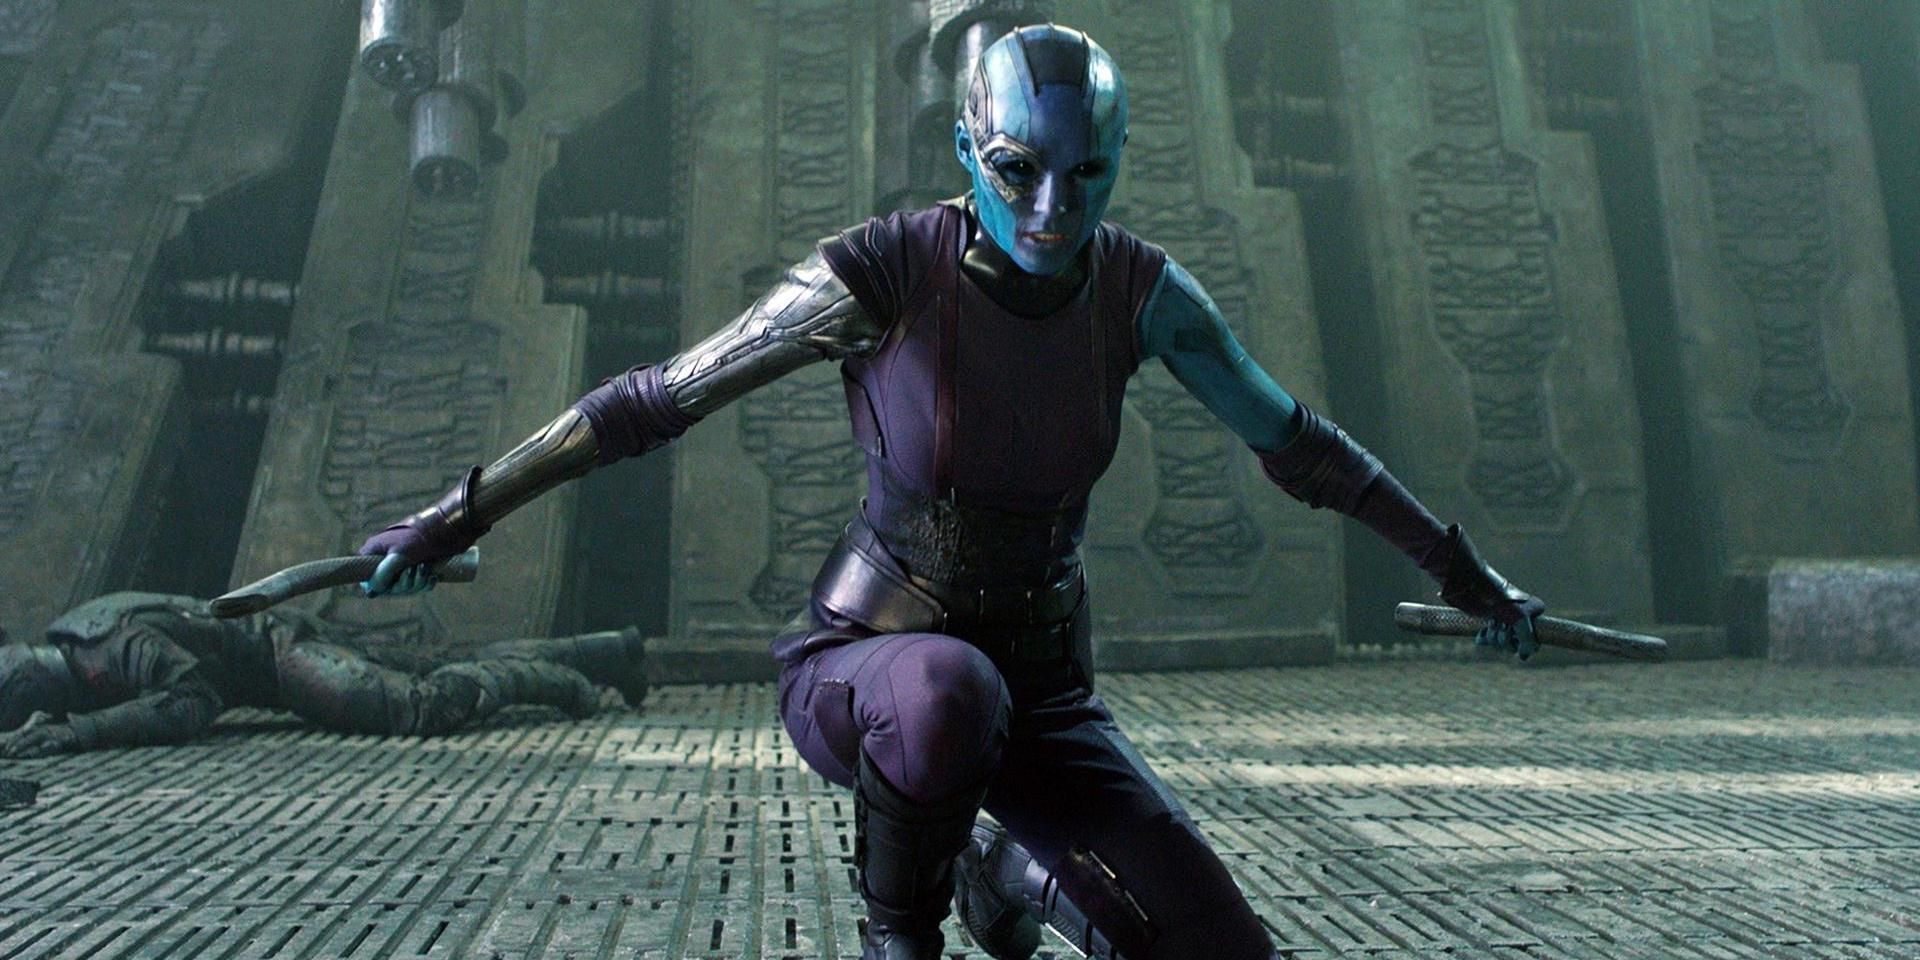 Nebula holding two swords in Guardians of the Galaxy